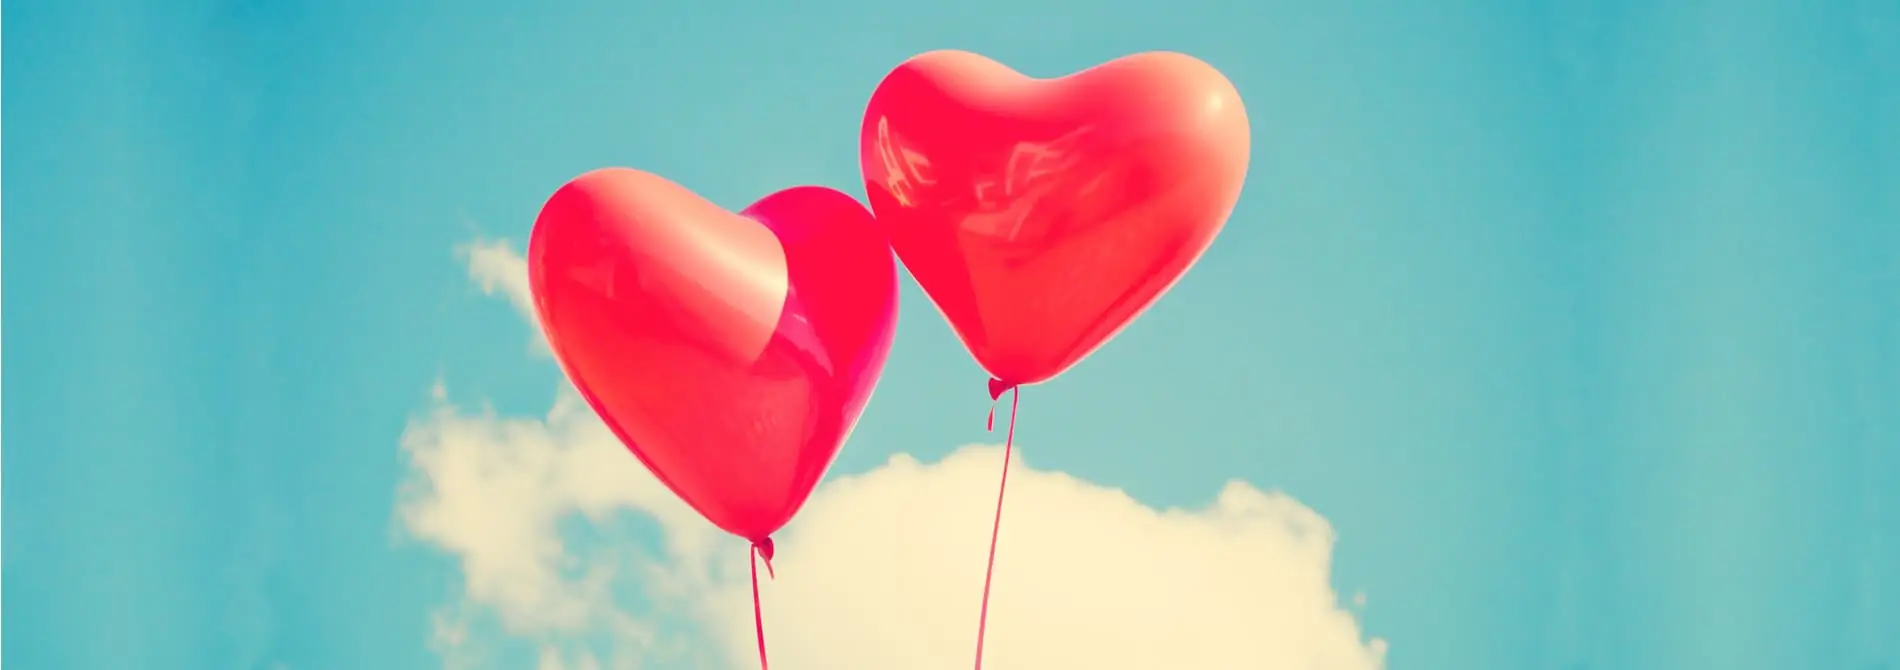 two heart shaped balloons